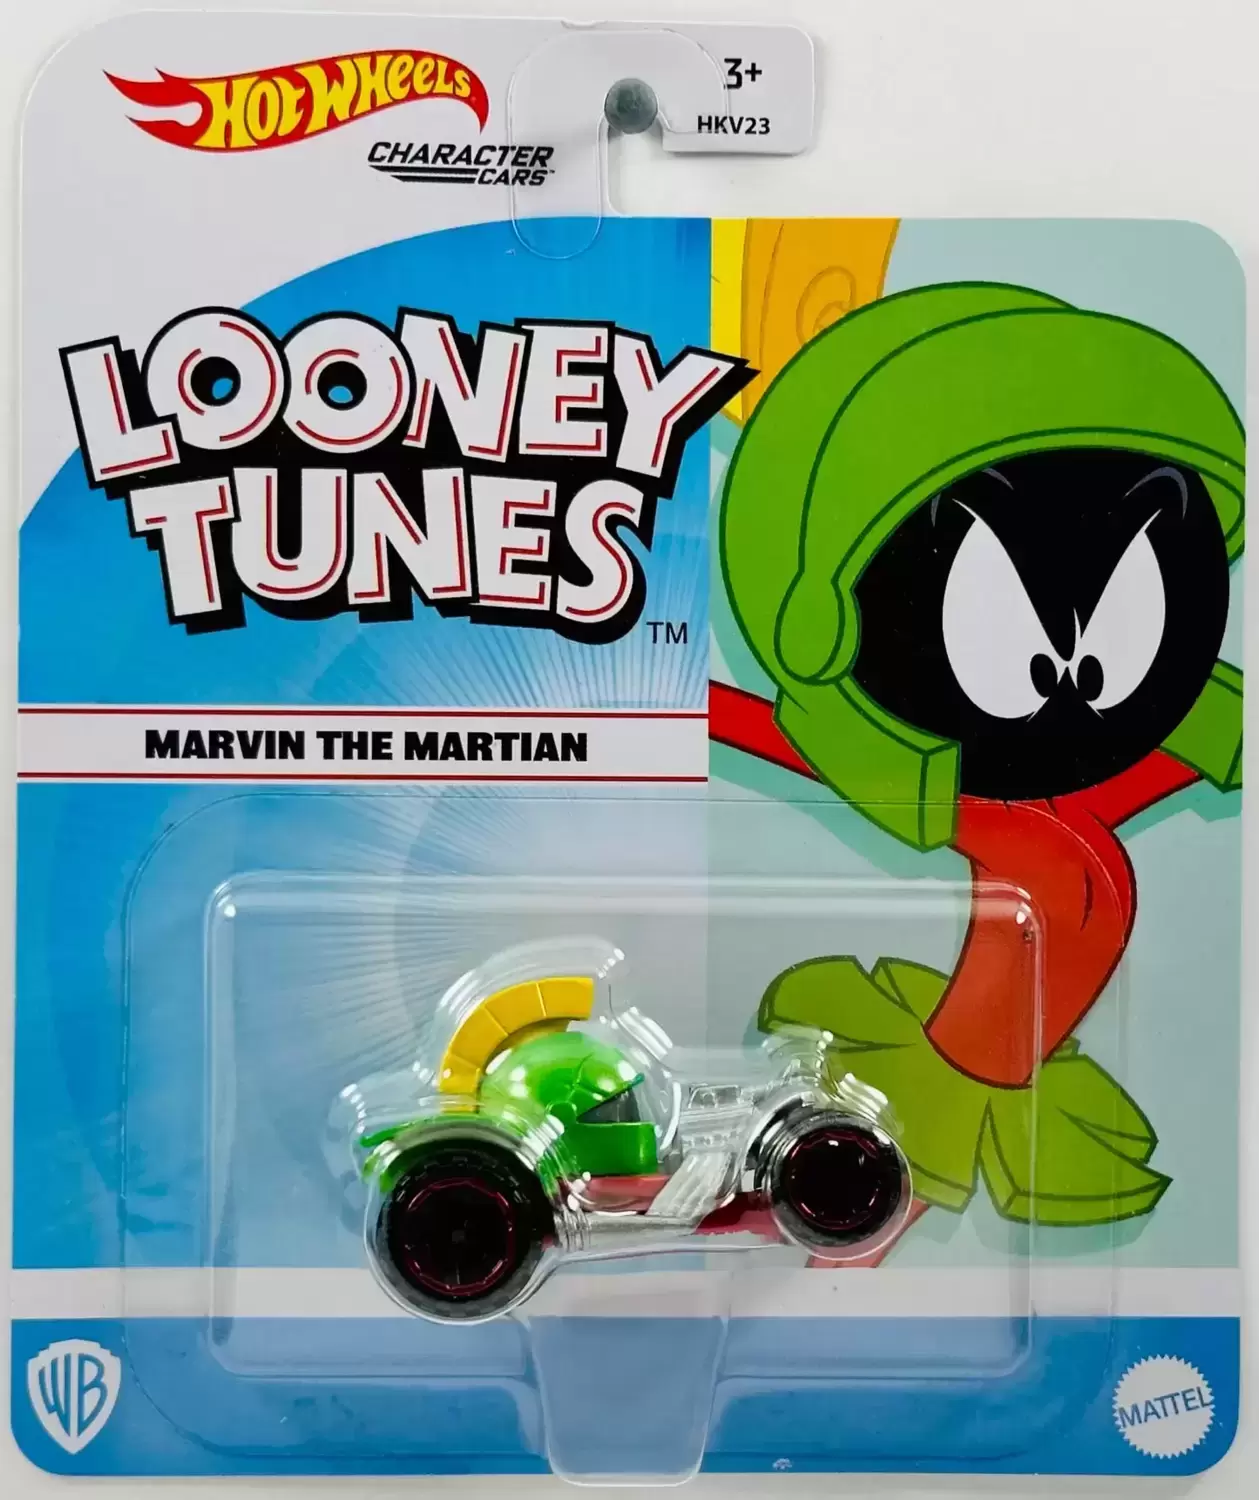 Looney Tunes Character Cars (2023) - HKV23 - Marvin the Martian